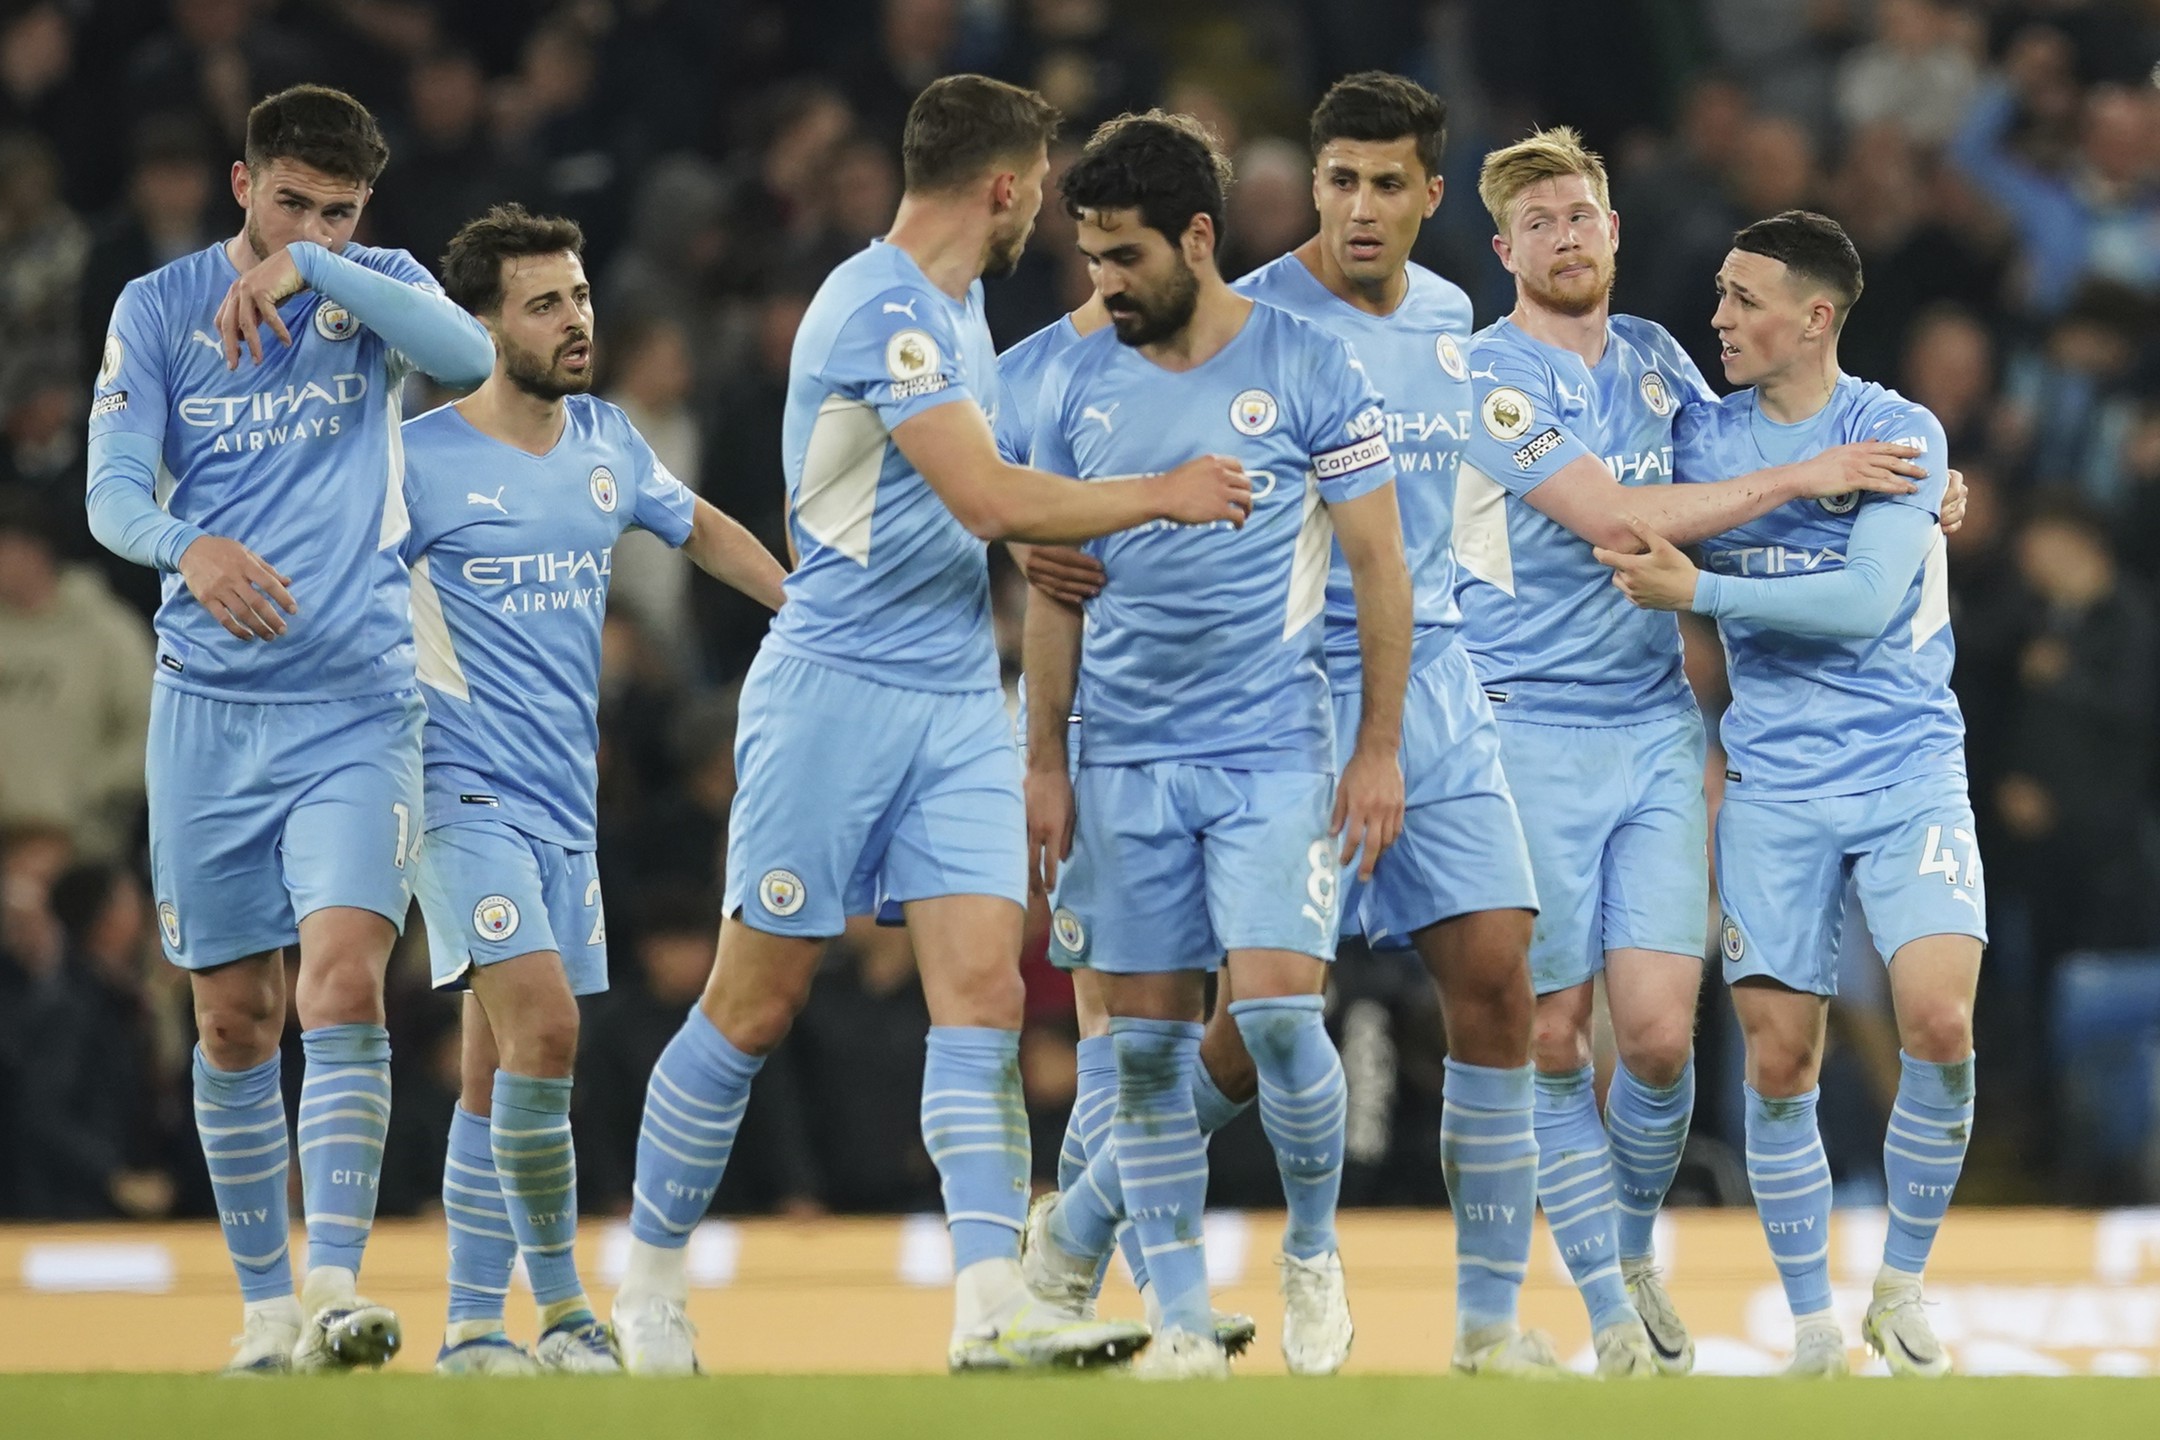 Manchester City 3-0 Brighton: Man City back on top of the ‘Premier League table’ after a commanding second-half performance, Check Man City beat Brighton HIGHLIGHTS